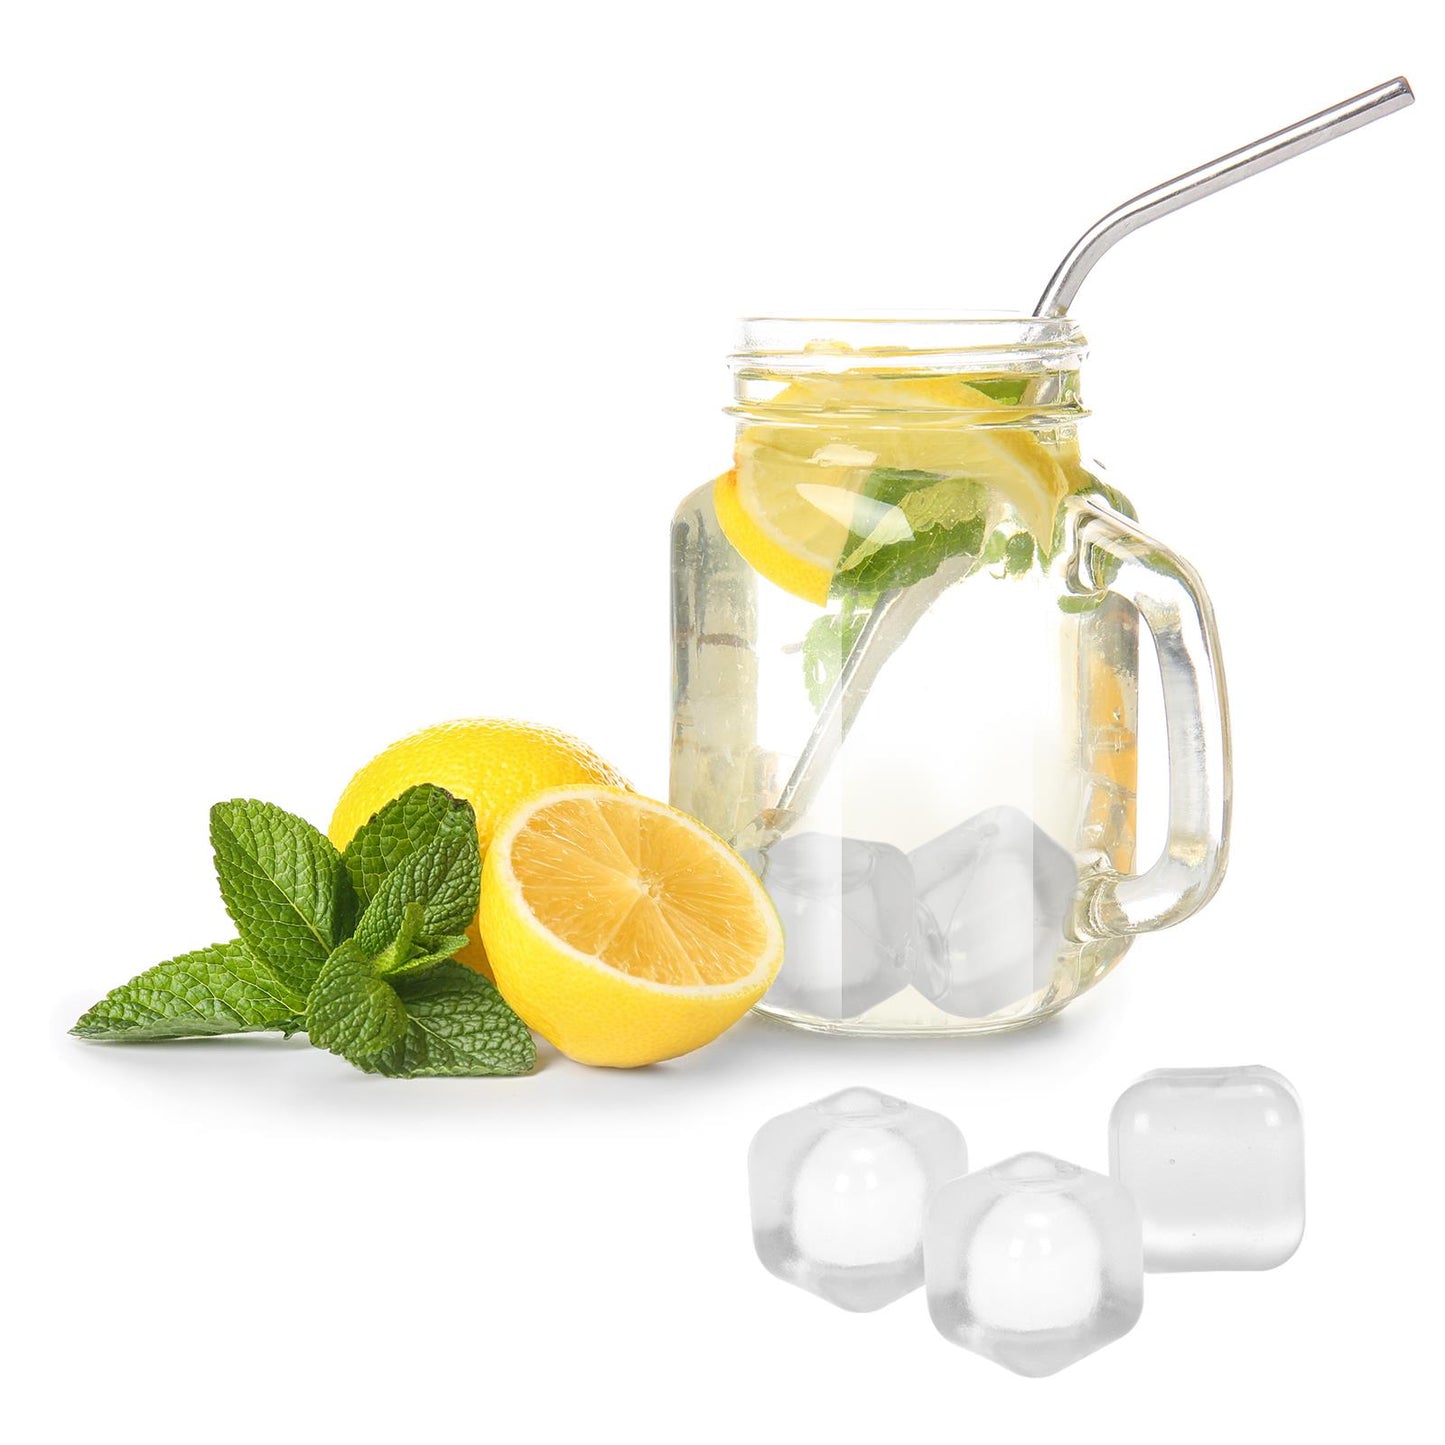 60 Reusable White Ice Cubes For Drinks